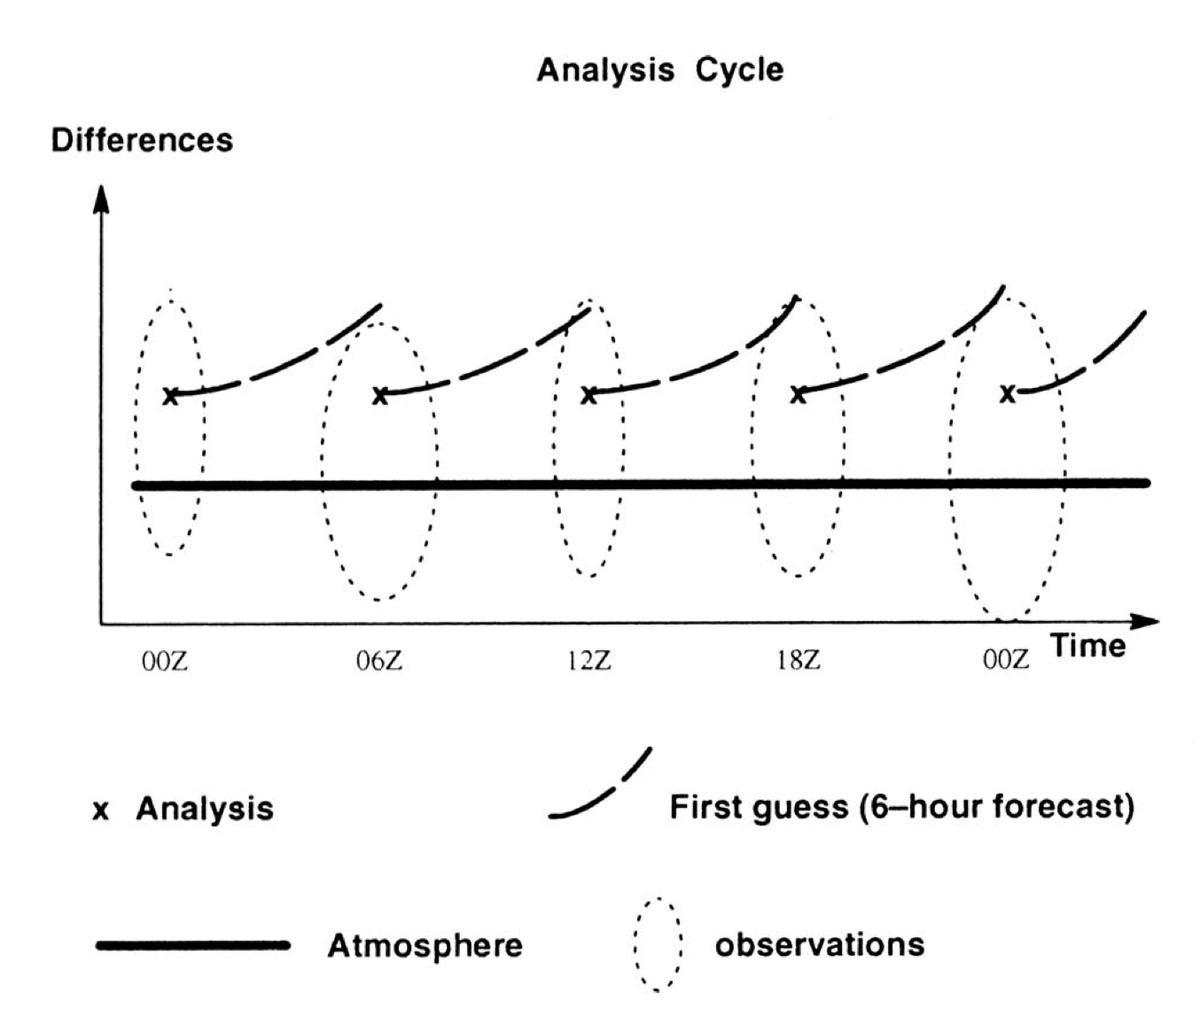 Ensemble forecasting has been the gold standard in Numerical Weather Prediction since the 1990s when it was introduced by one of my PhD advisors Eugenia Kalnay. https://journals.ametsoc.org/doi/pdf/10.1175/1520-0477%281993%29074%3C2317%3AEFANTG%3E2.0.CO%3B2